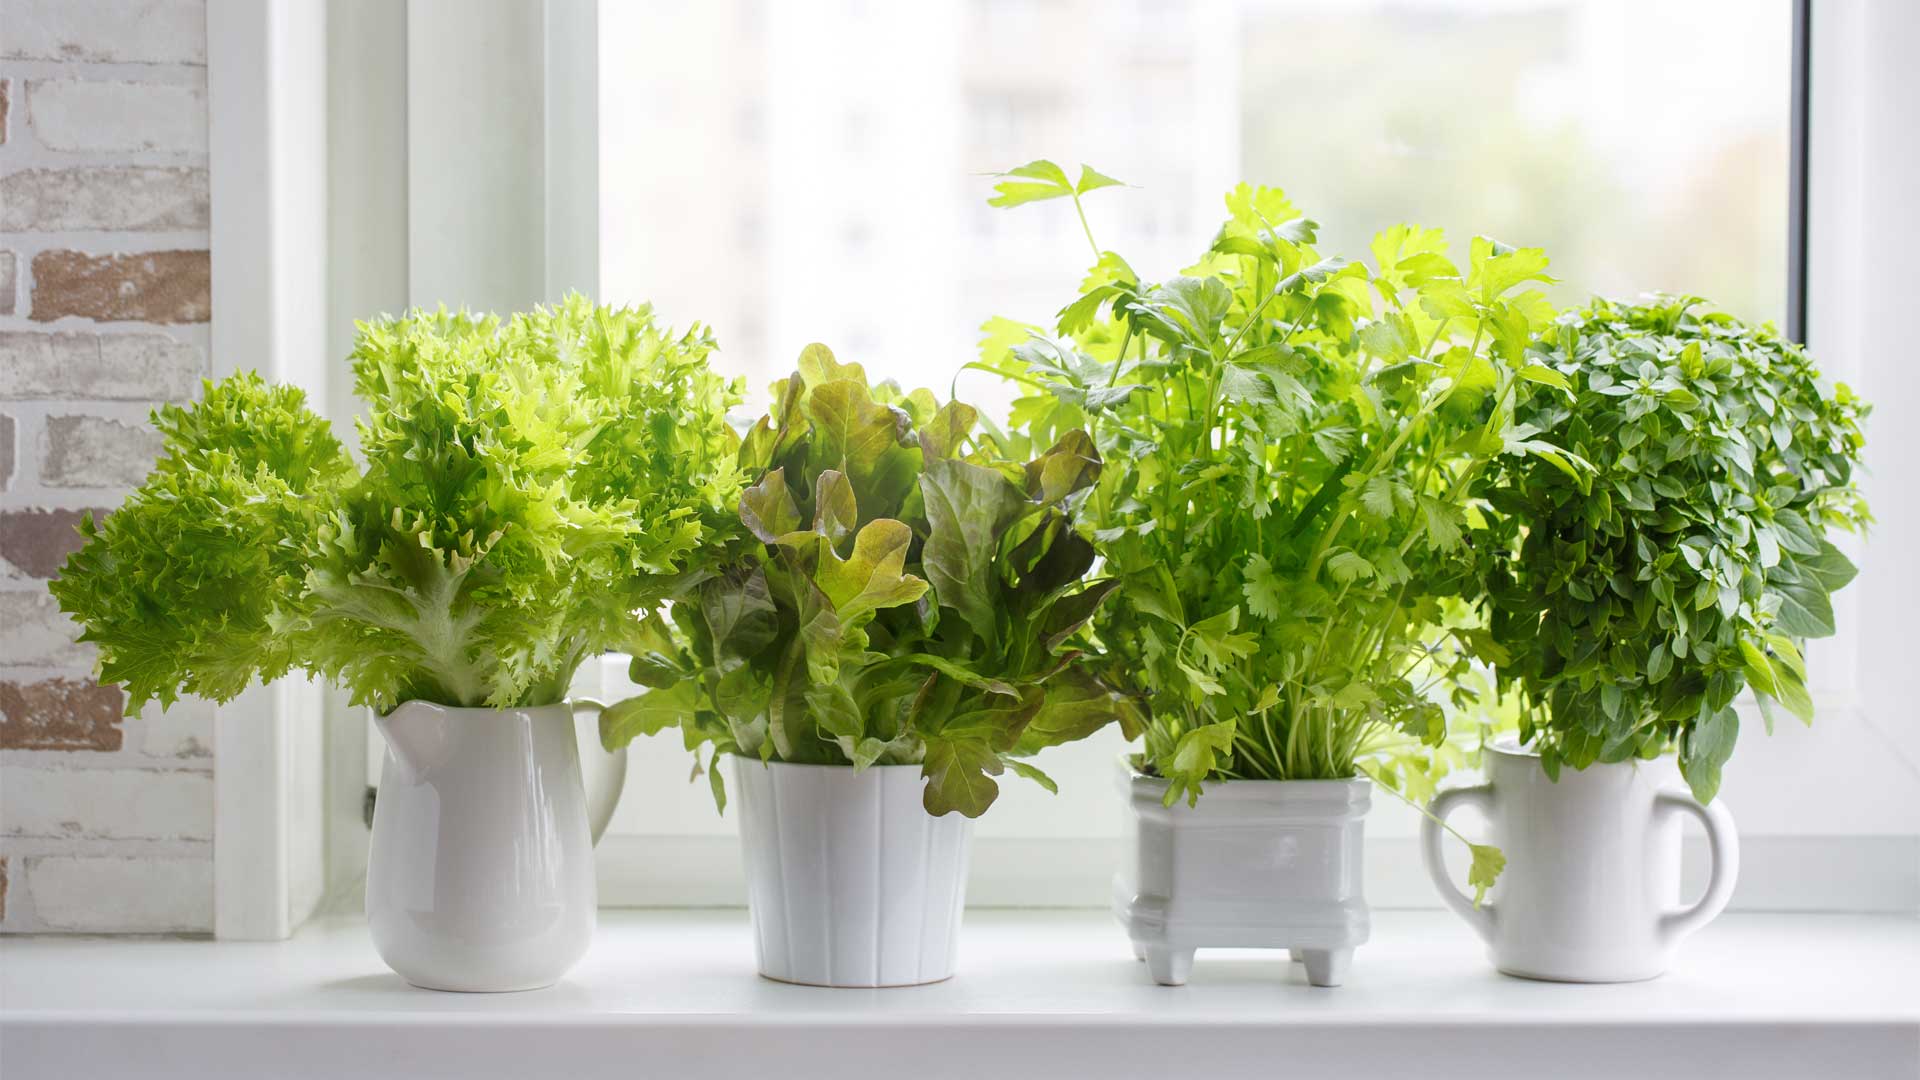 How to Grow Vegetables & Herbs Indoors During Winter? - Satellite Garden Centre 